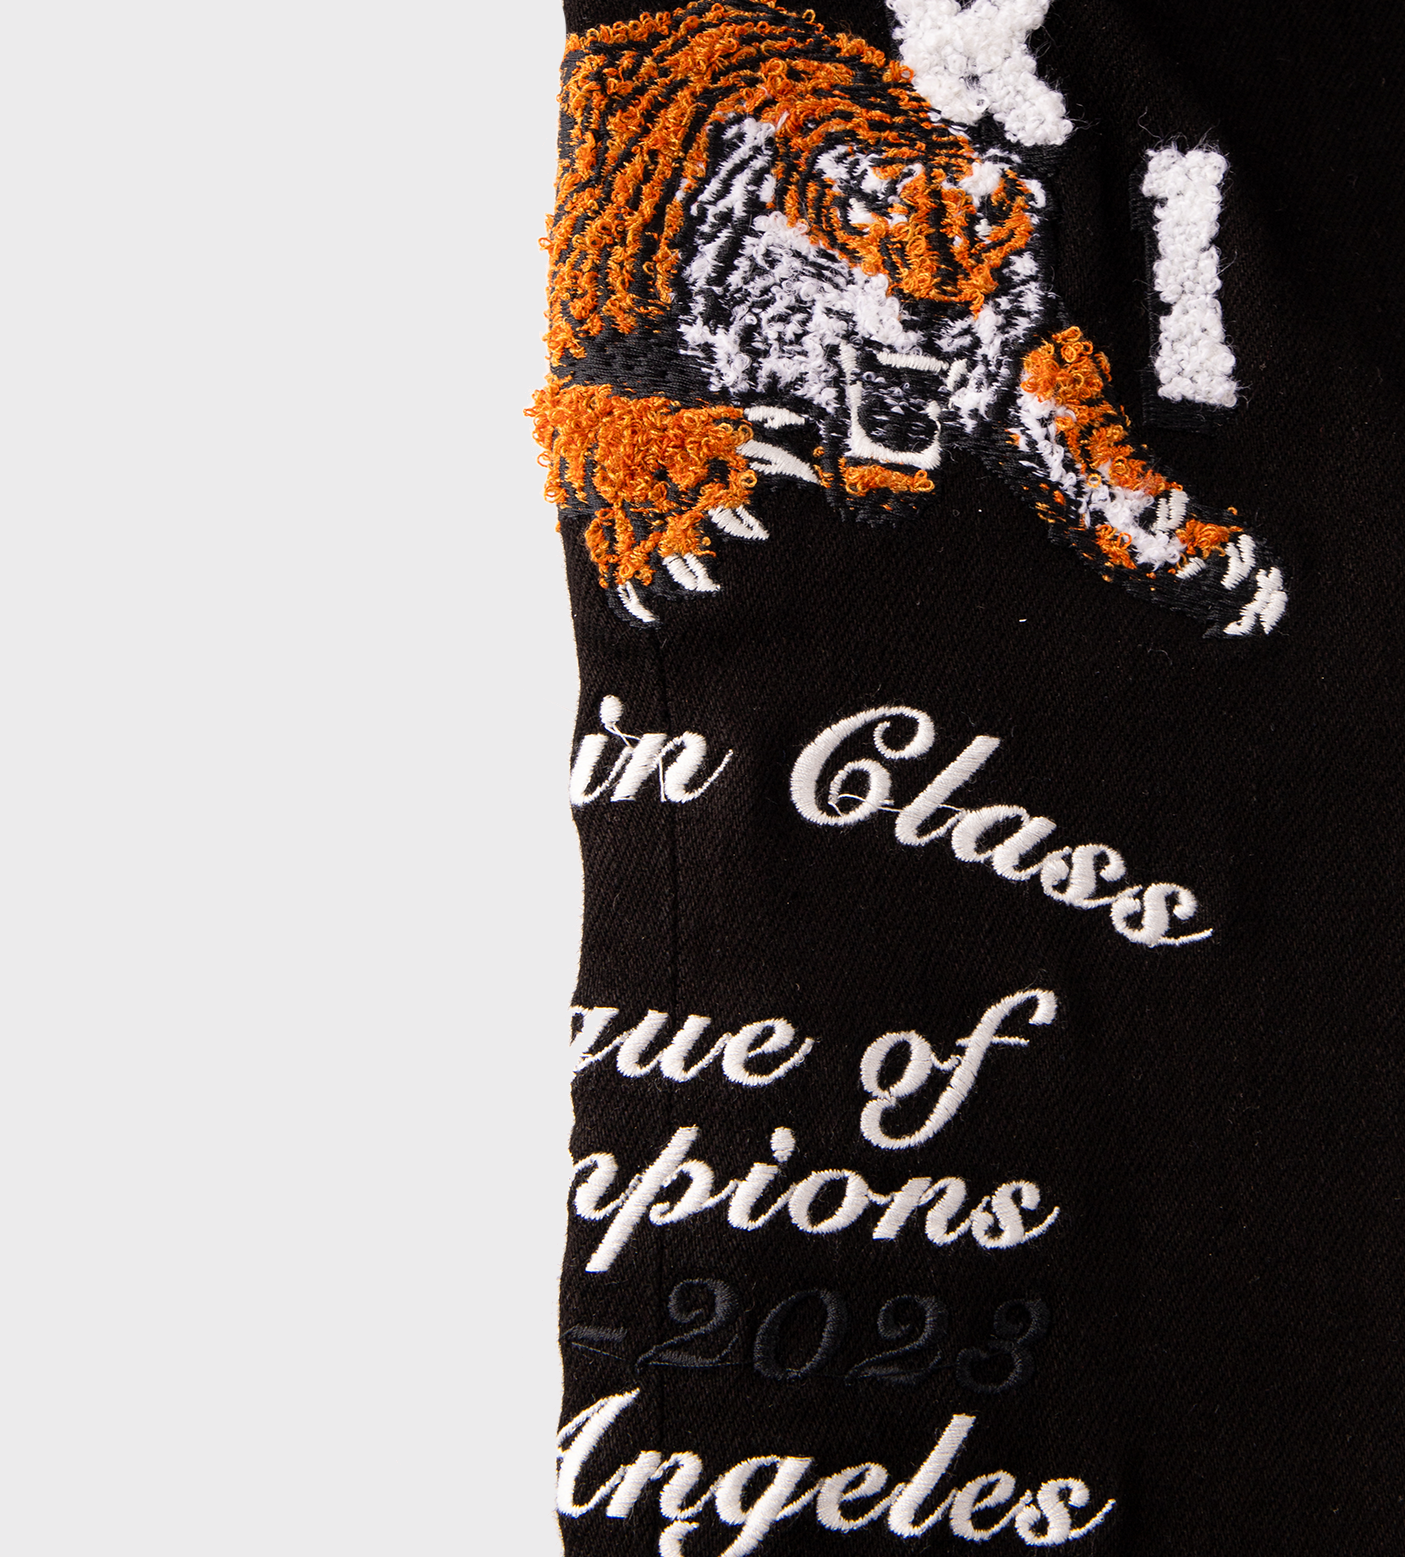 Tiger Embroidery Jeans Black